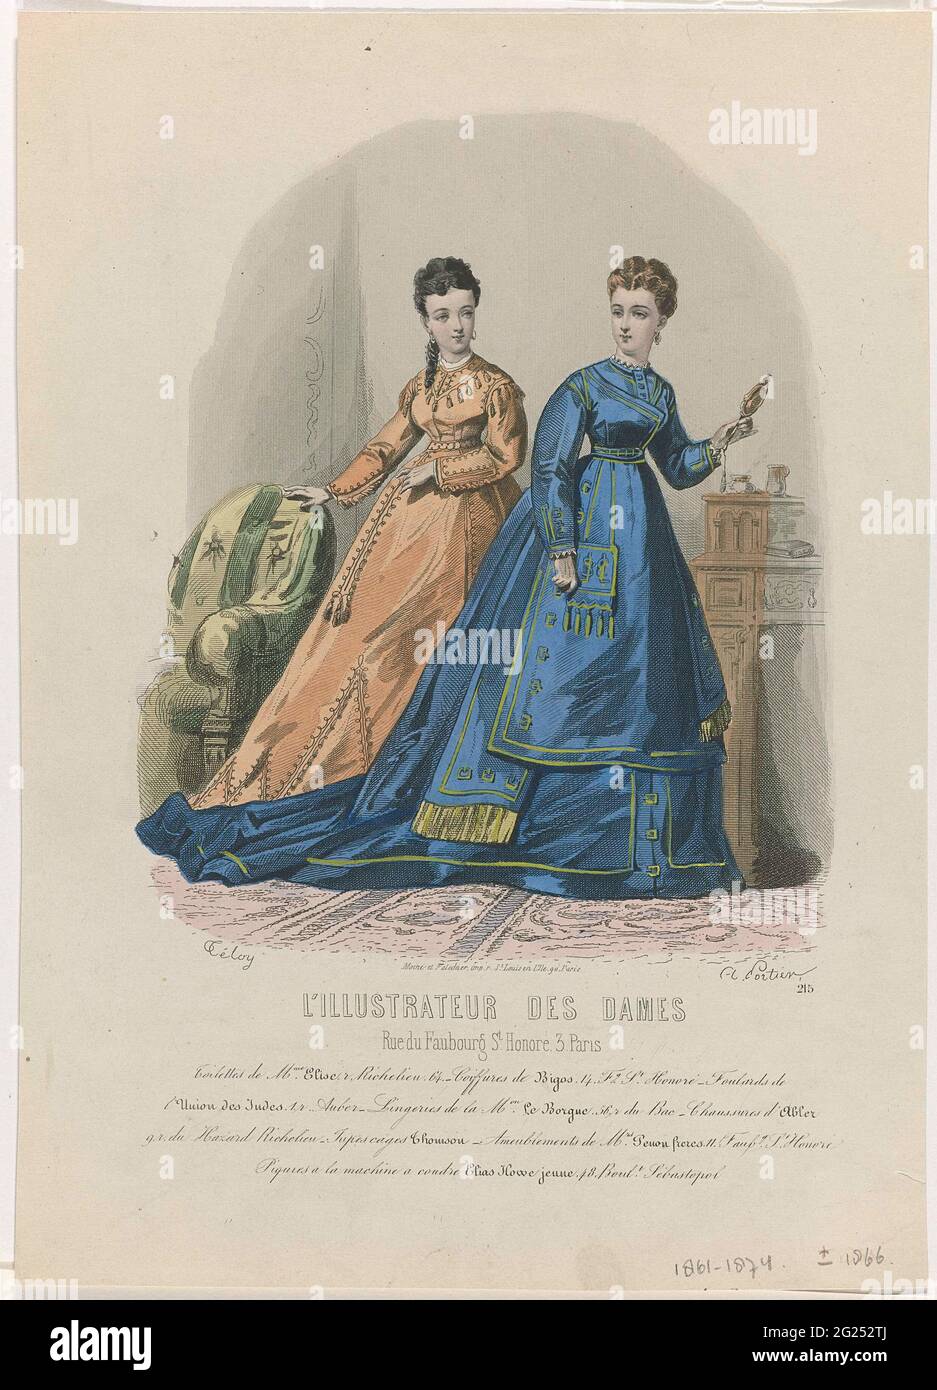 L'Illustrate des Ladies, ca. 1867, No. 215: Toilettes De Mme Elis (...).  Two women in an interior. According to the caption: Ensembles from Elise.  'Coiffures' (hairstyles) by BIGOS. Below some rules advertising